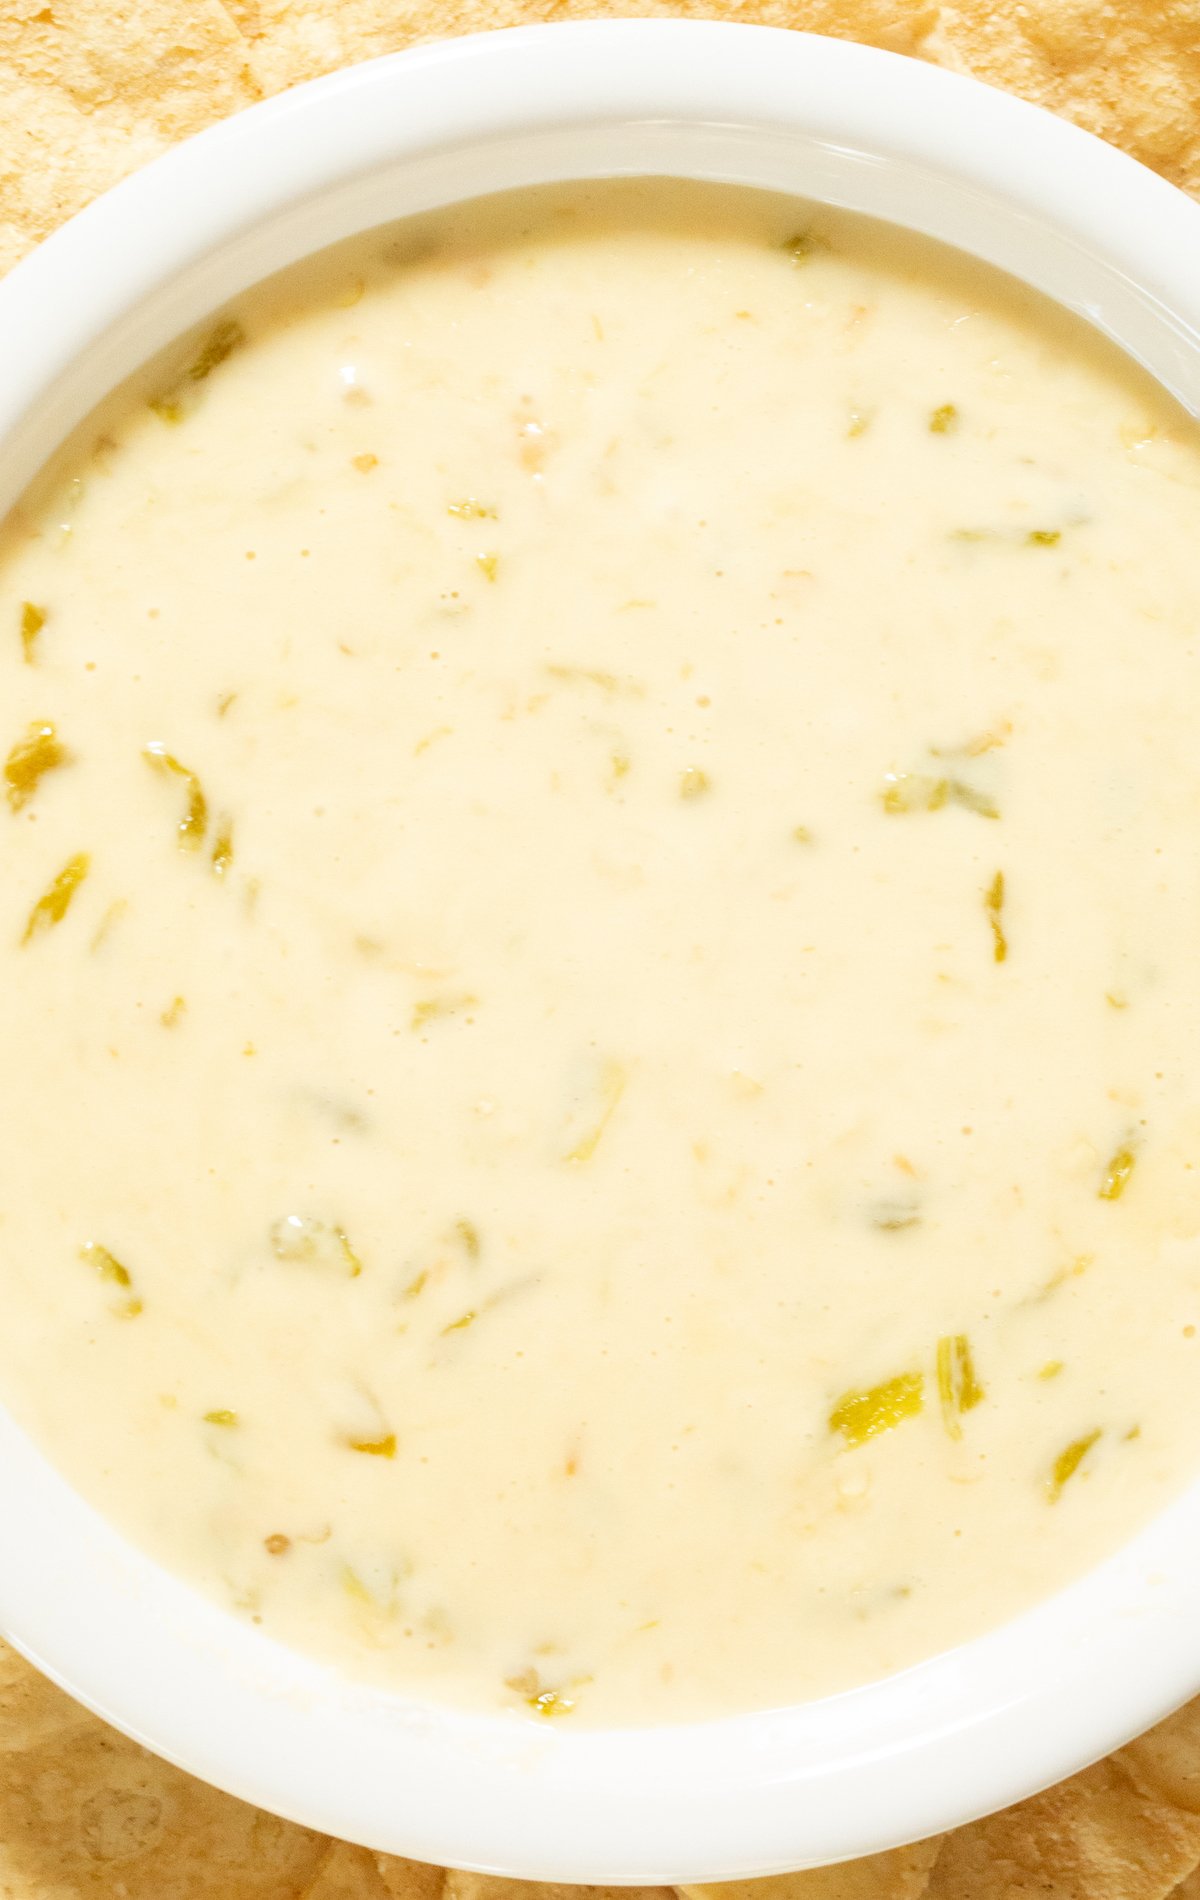 A white bowl filled with a light colored hatch queso that has visible chopped hatch green chiles throughout.